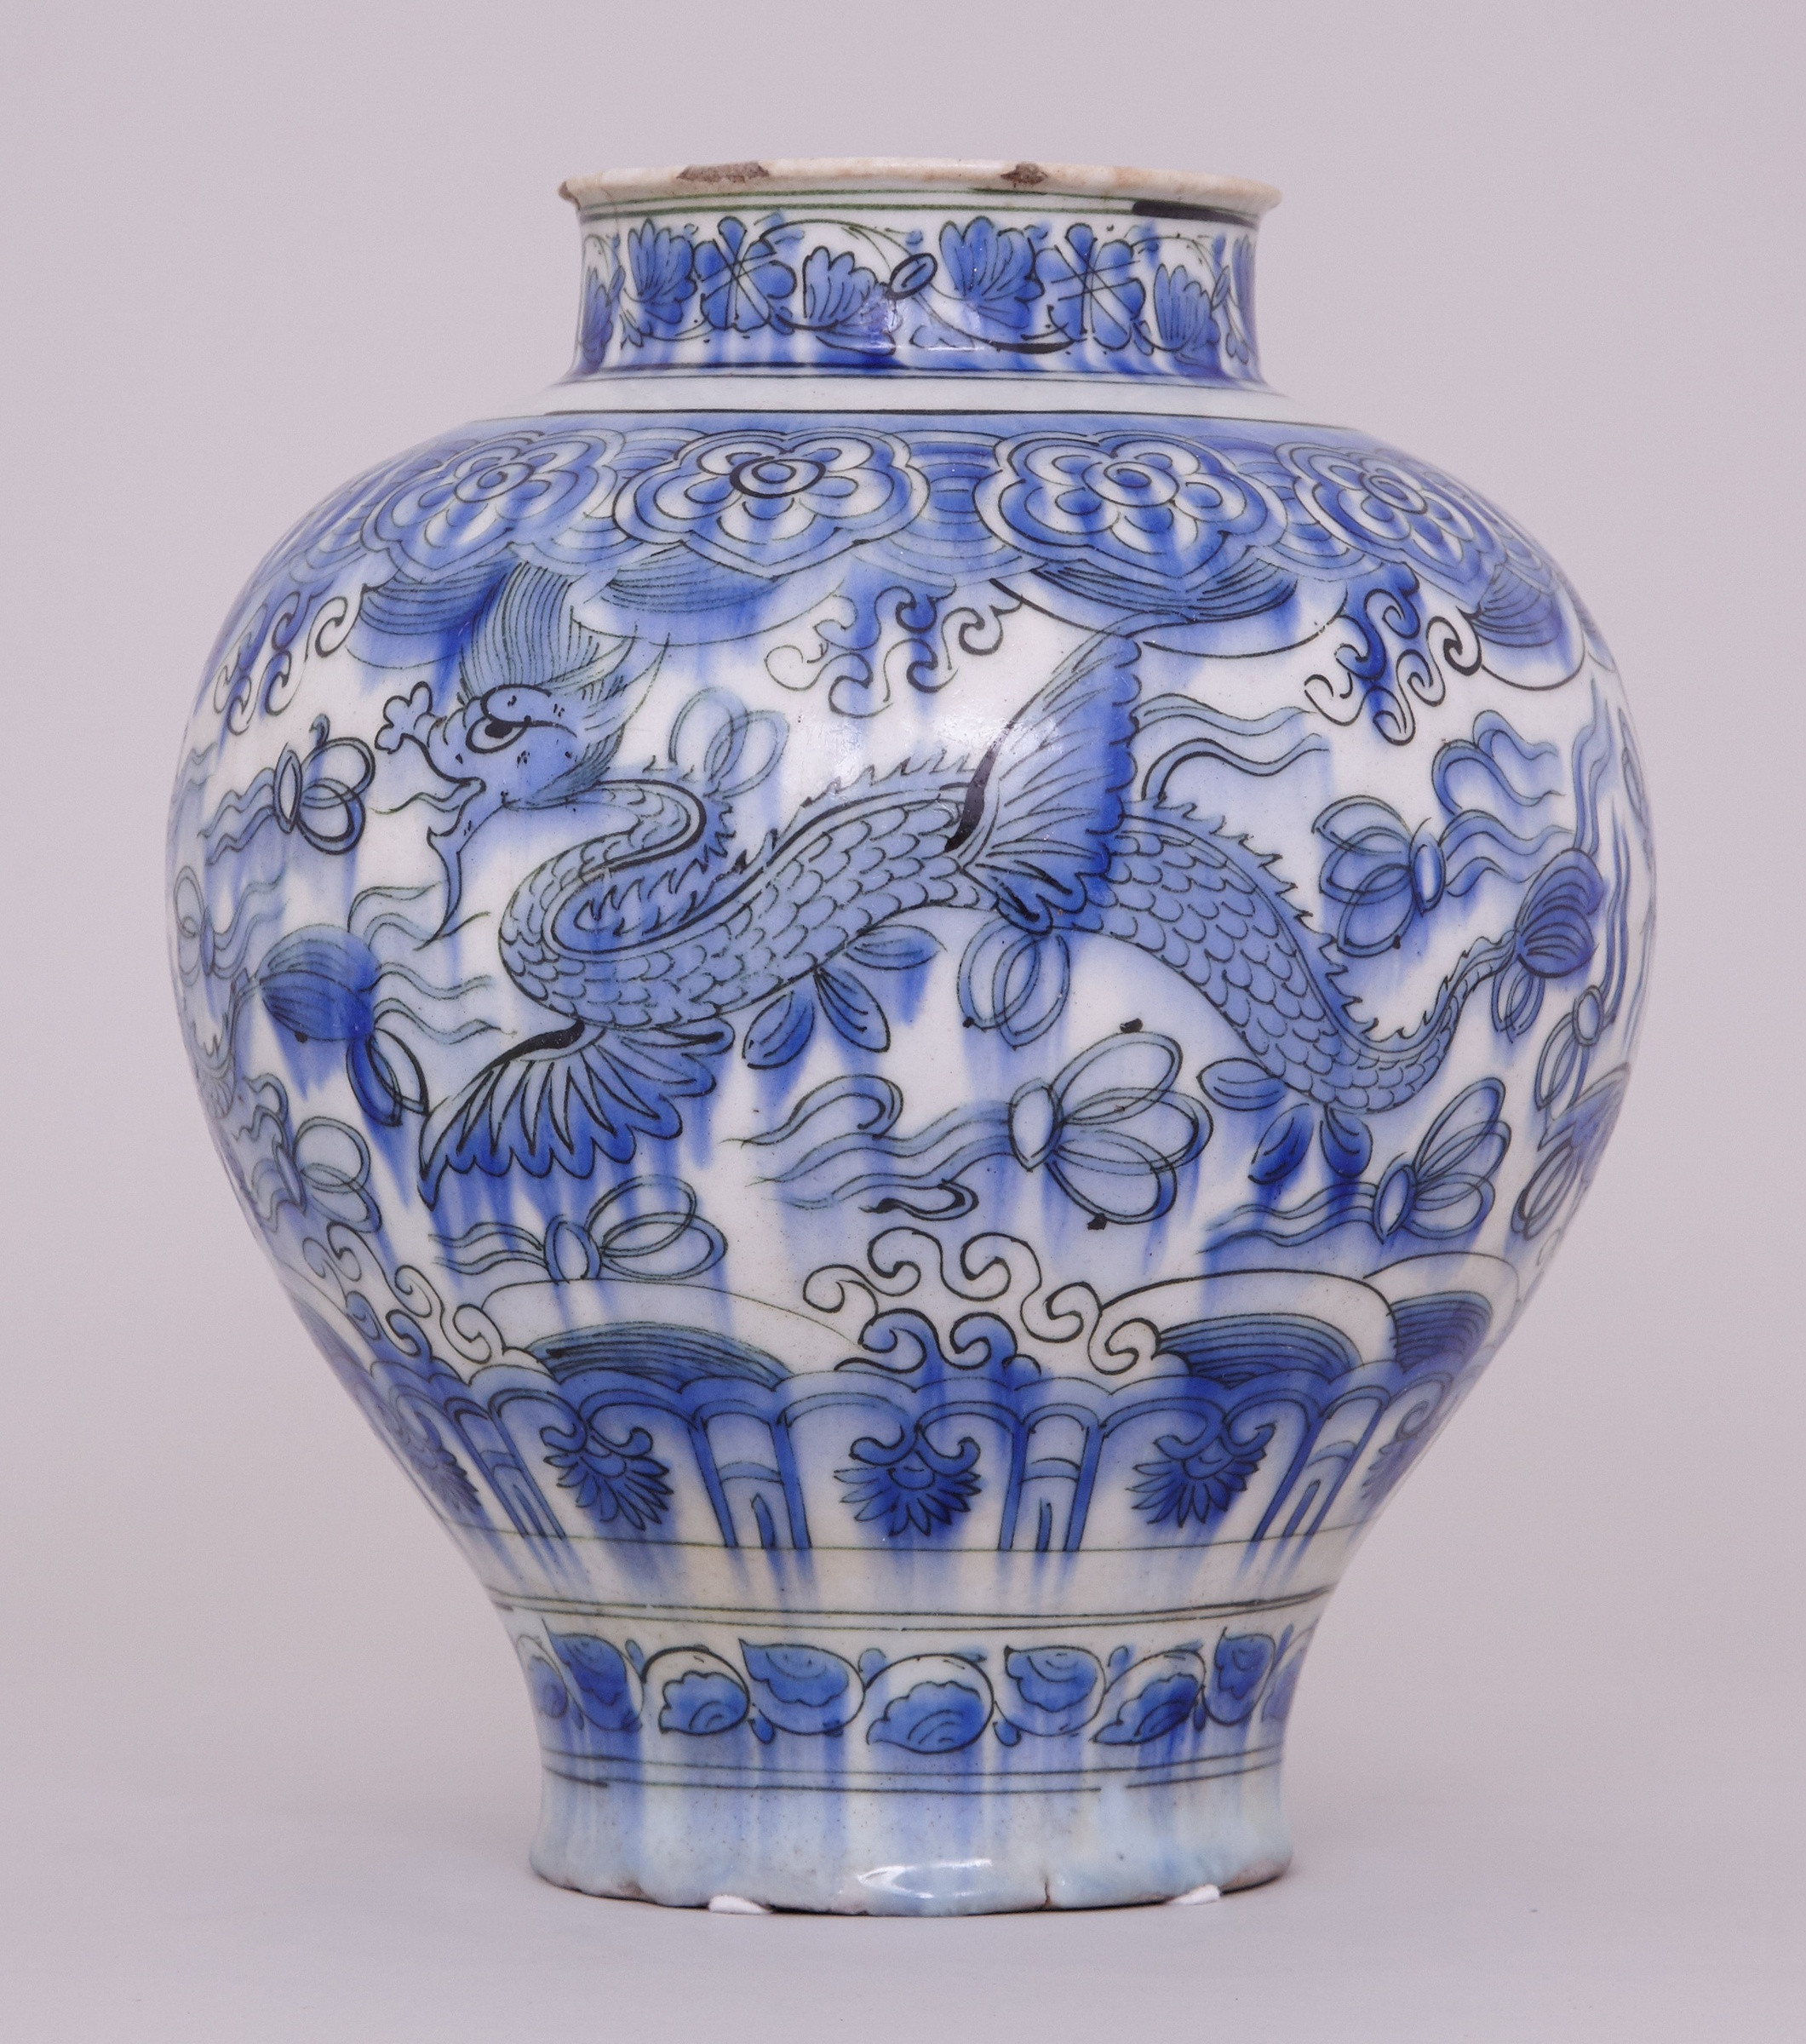 19 Trendy Chinese Vase Umbrella Stand 2024 free download chinese vase umbrella stand of blue and white ceramic vase pics ming dynasty blue and white pertaining to blue and white ceramic vase image a blue and white persian safavid jar 17th century 